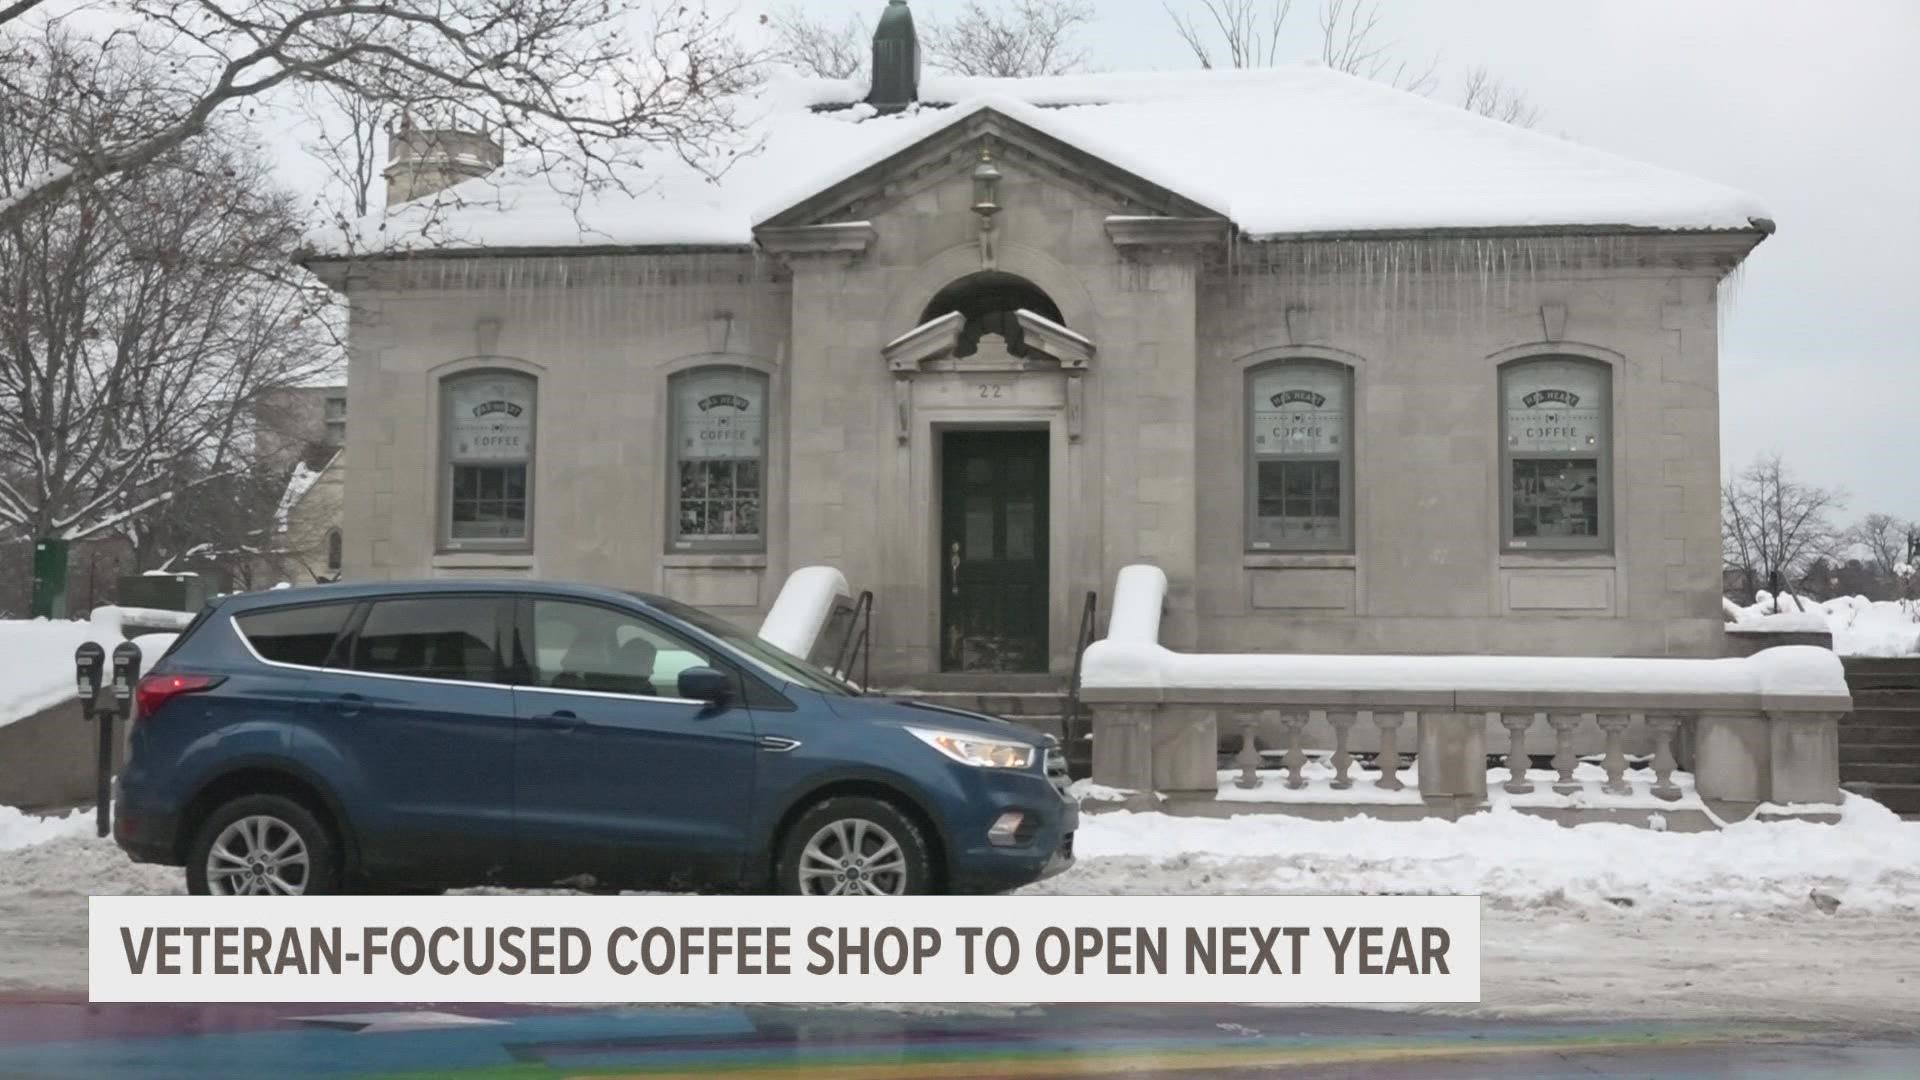 Has Heart plans to open a coffee shop in Veterans Memorial Park.